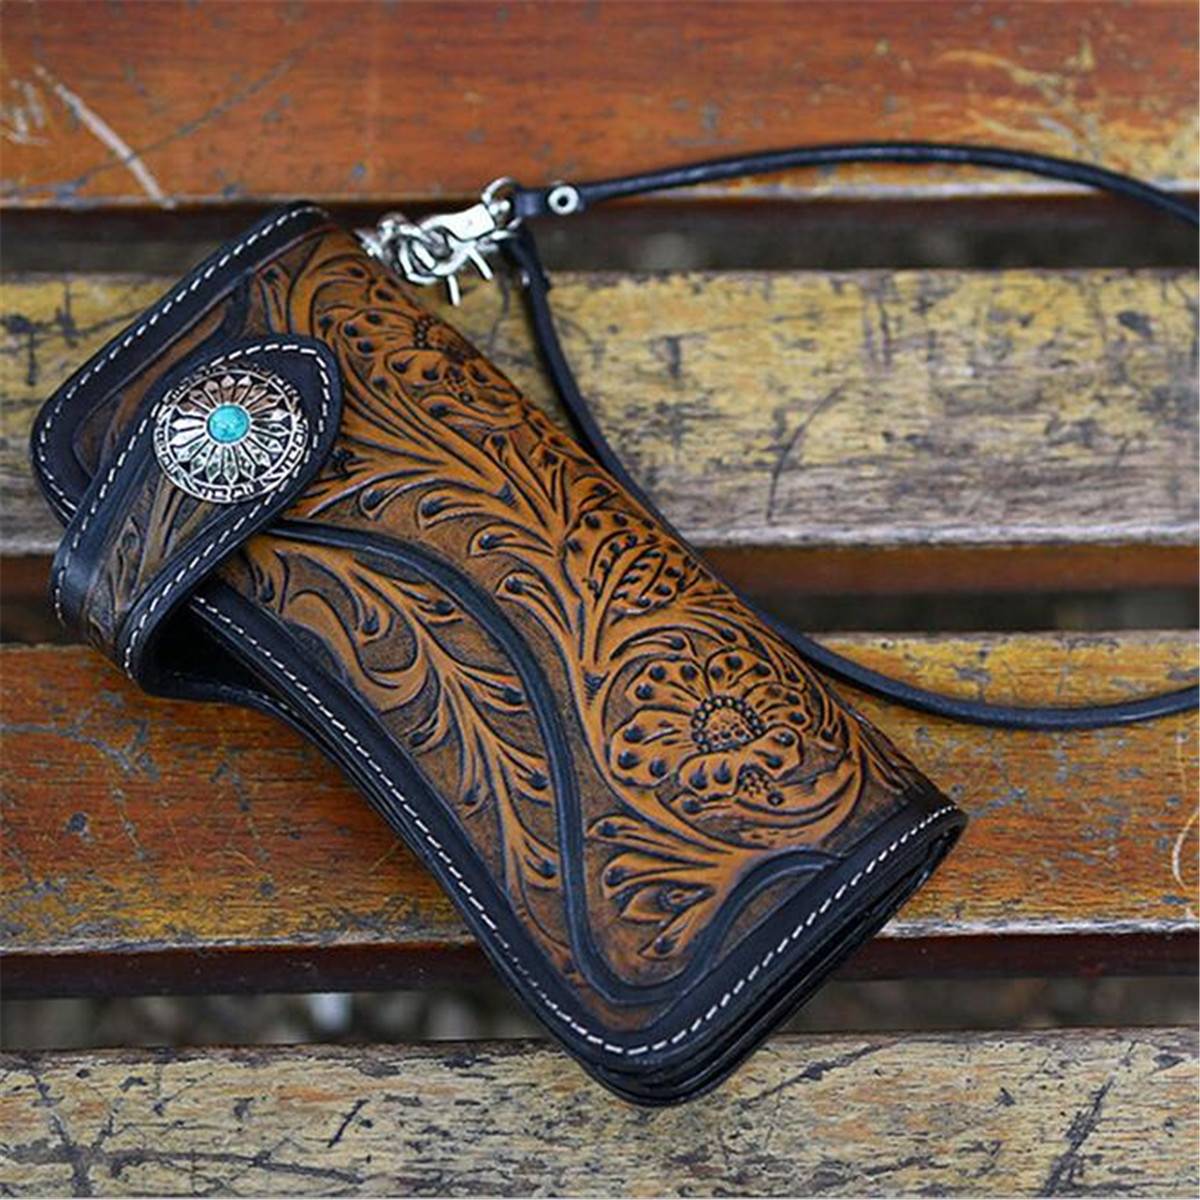 Genuine Leather Handmade Vintage Clutch Wallet with Chain